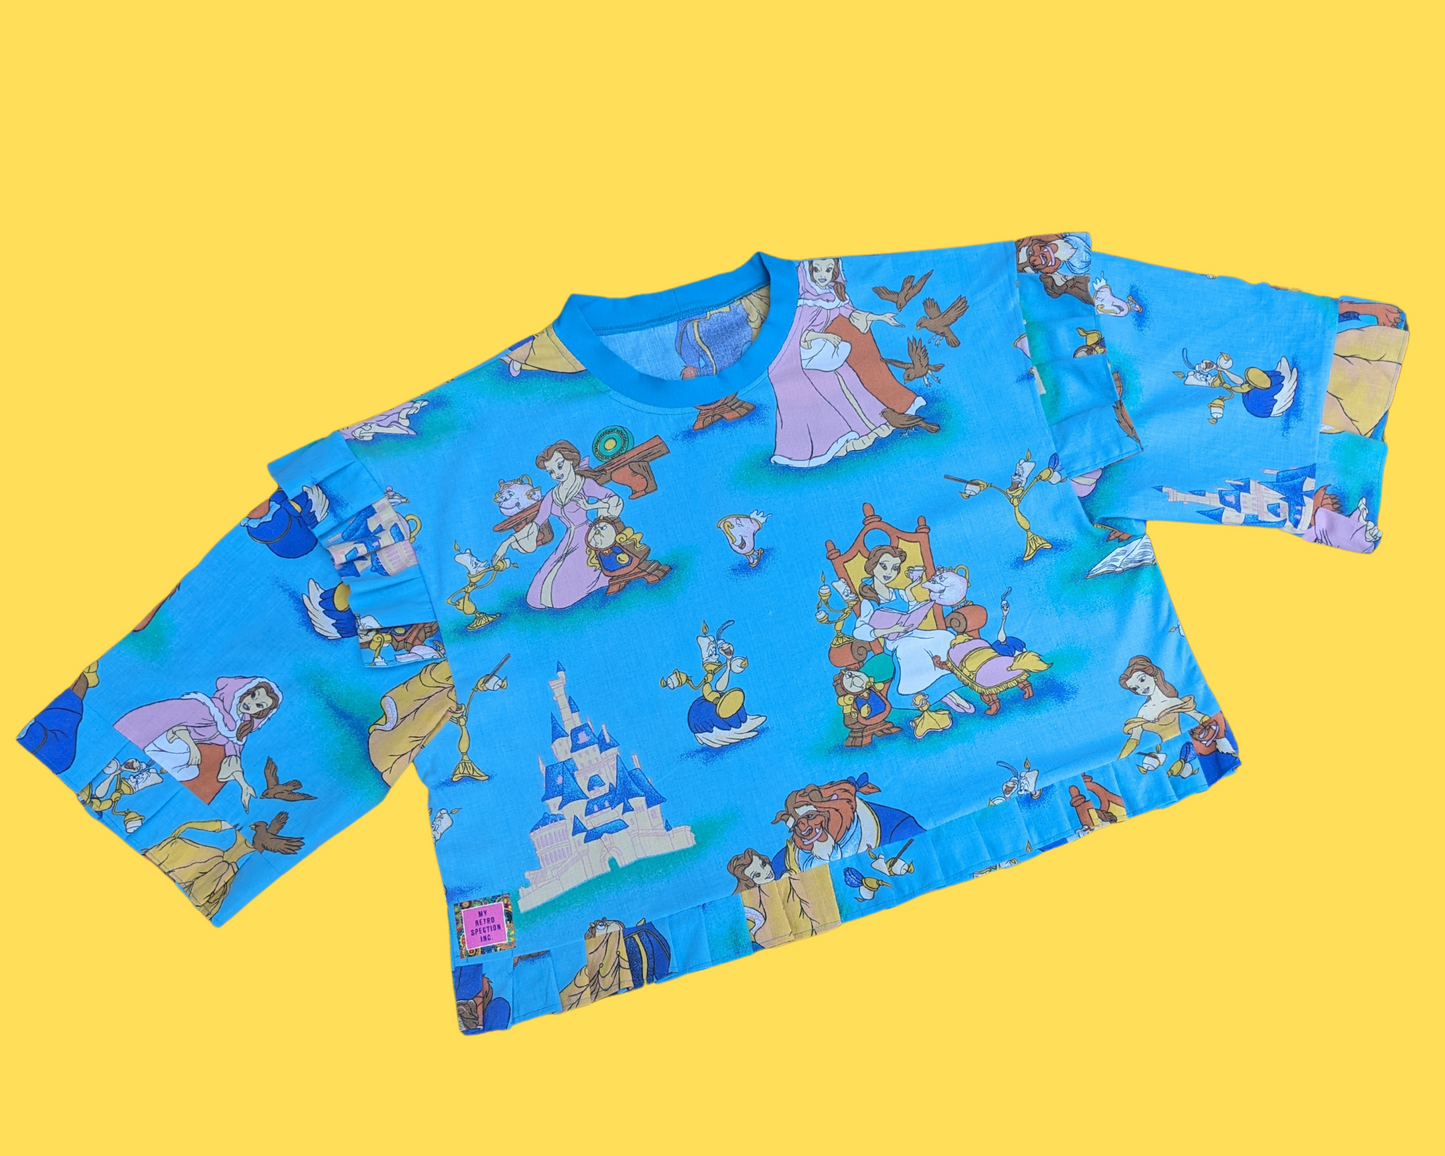 Handmade, Upcycled Vintage 1990's Beauty and the Beast Bedsheet Crop Top Size M-L-XL with Matching Bucket Hat